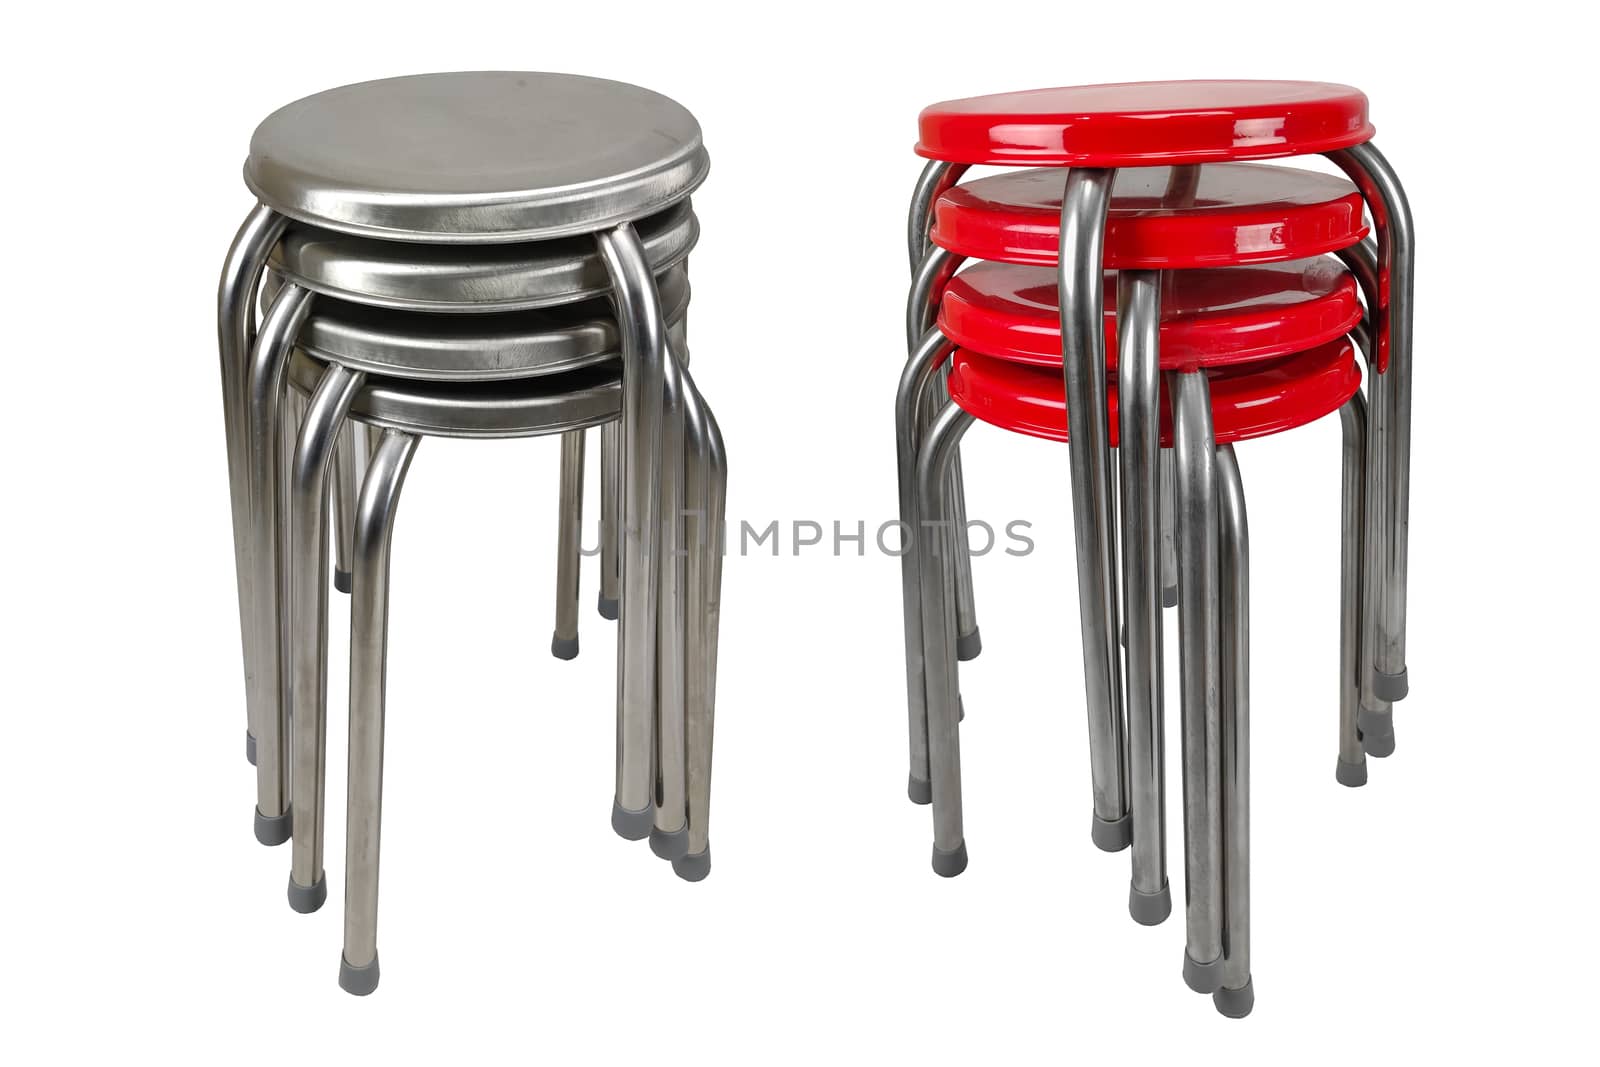 Stack chairs stainless on white background by Buttus_casso